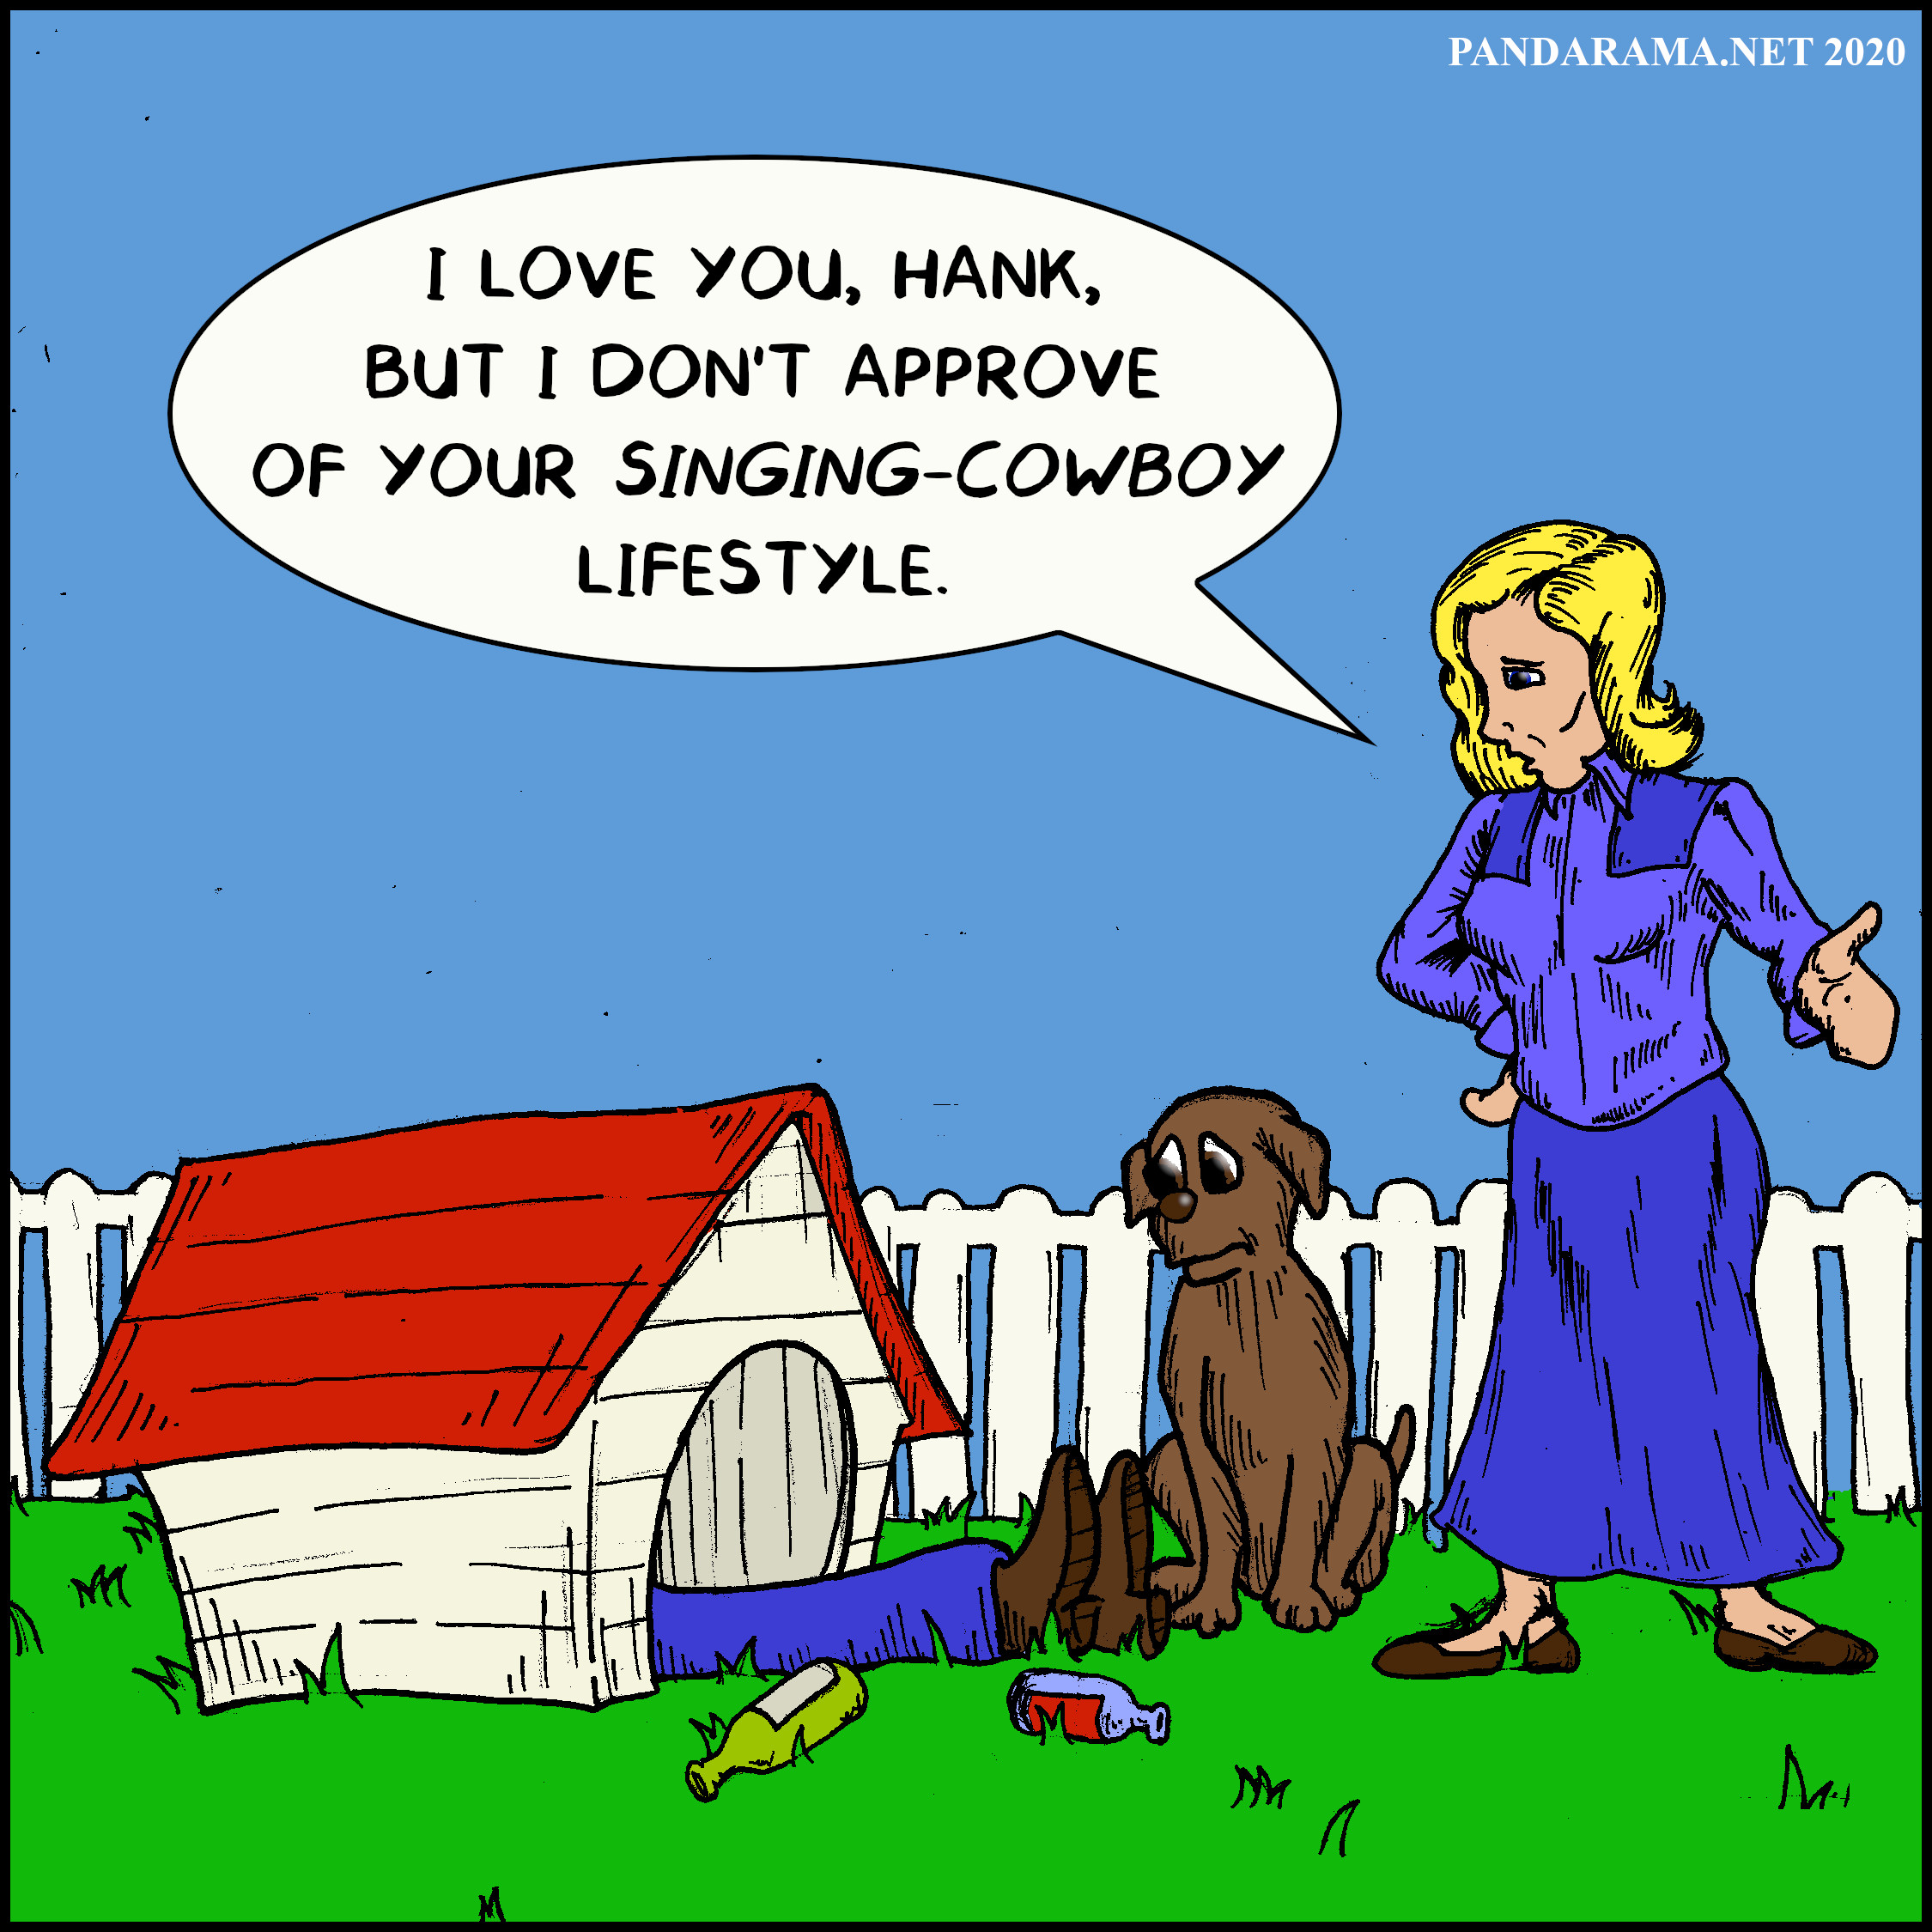 pandarama cartoon. woman says to man who is passed out drunk in a dog house, 'I love you Hank, but I don't approve of your singing-cowboy lifestyle.